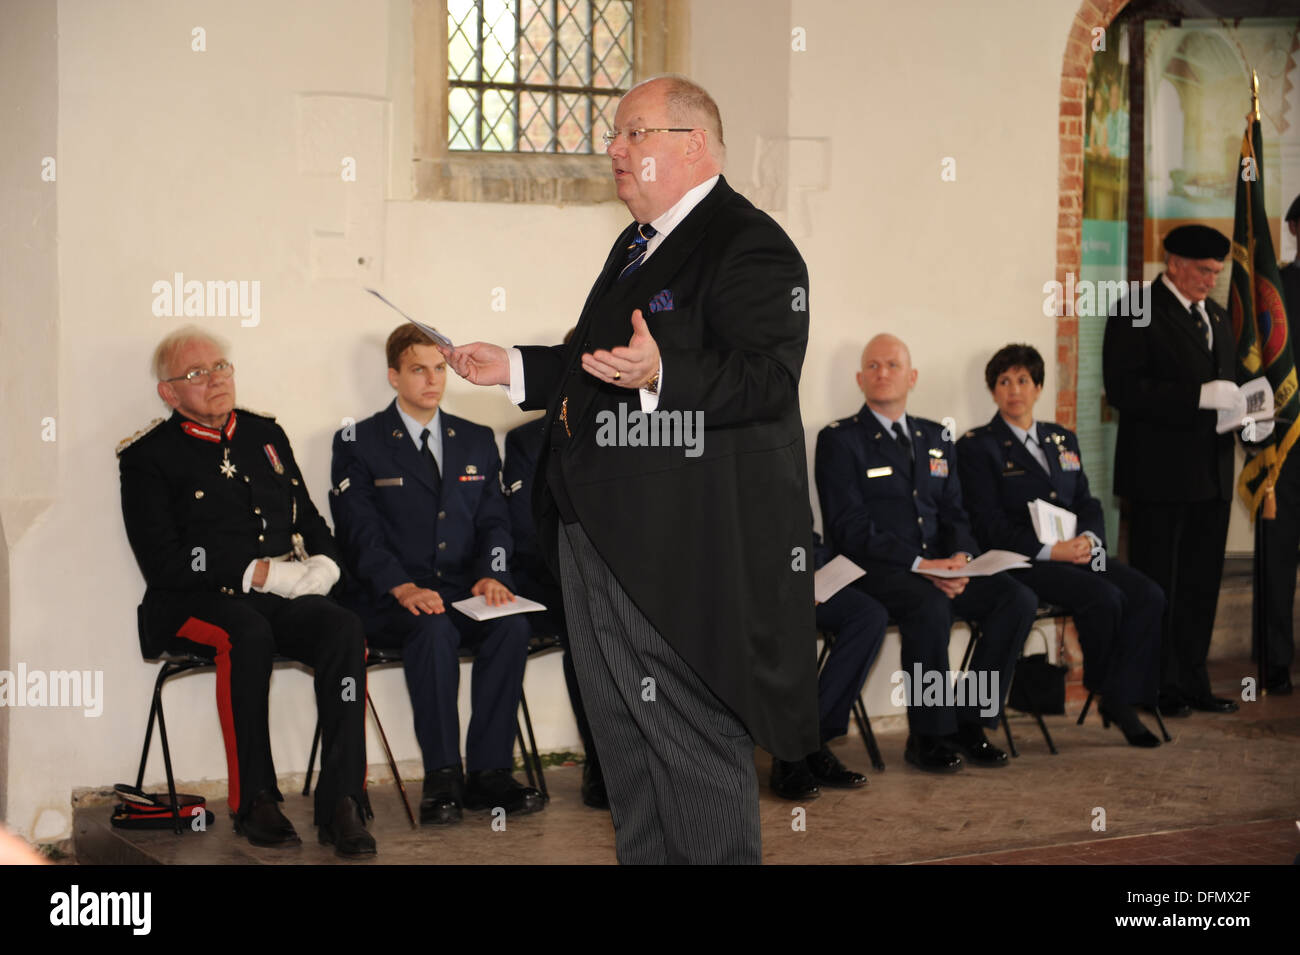 The Right Honorable Eric Pickles, Member of Parliament, thanks everyone who attended the remembrance service Sept. 28, 2013, at Stock Photo